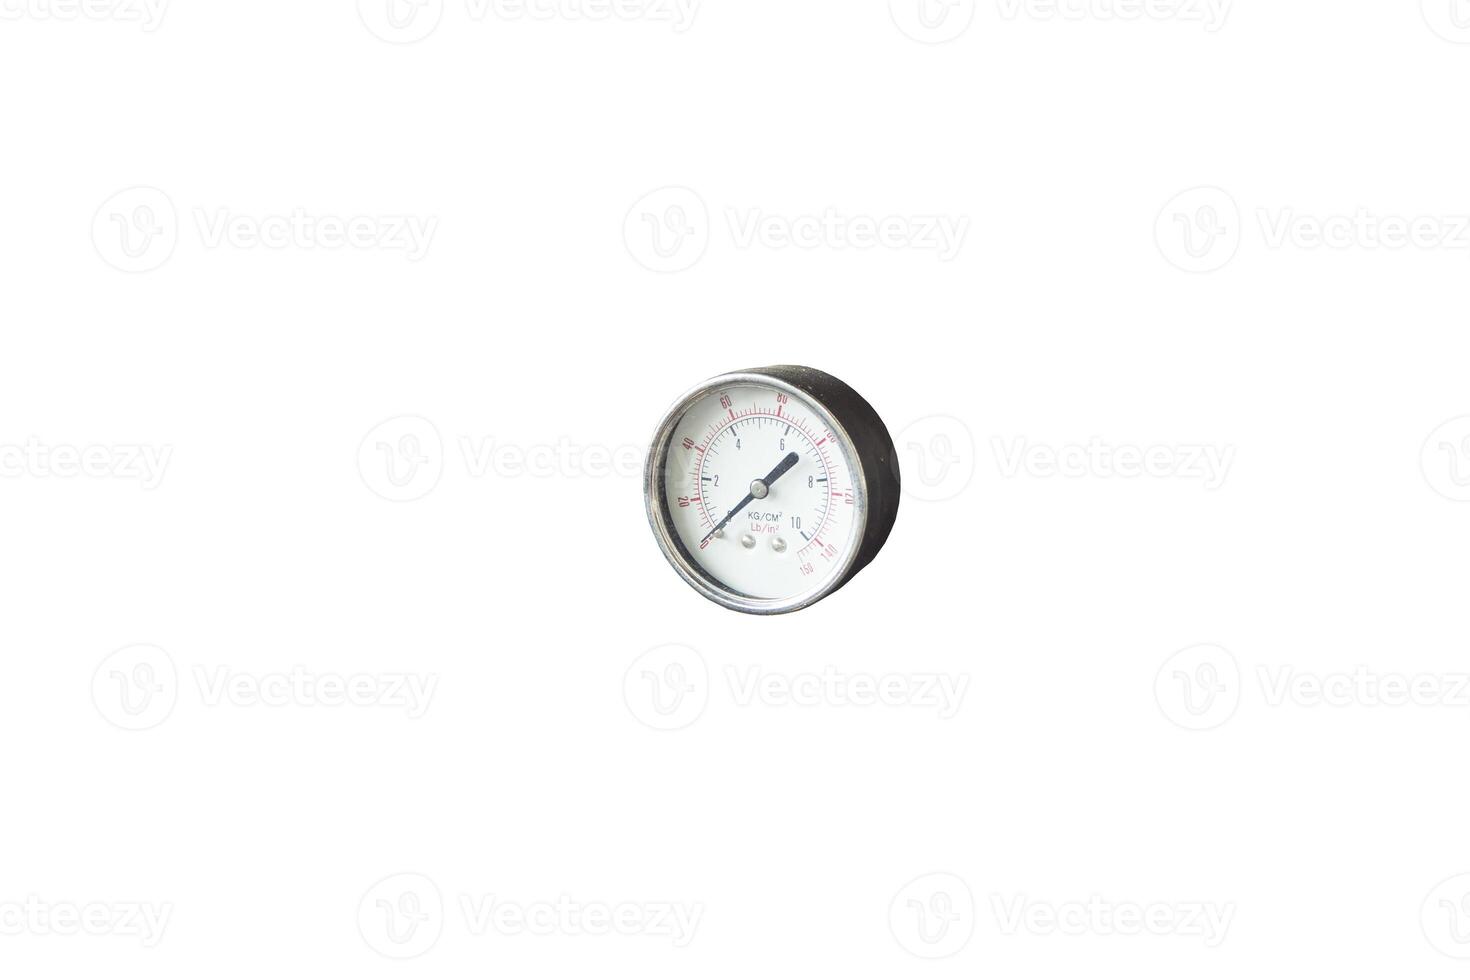 Isolated compass with close-up detail on white background, surrounded by watch-related objects and symbols like time, money photo